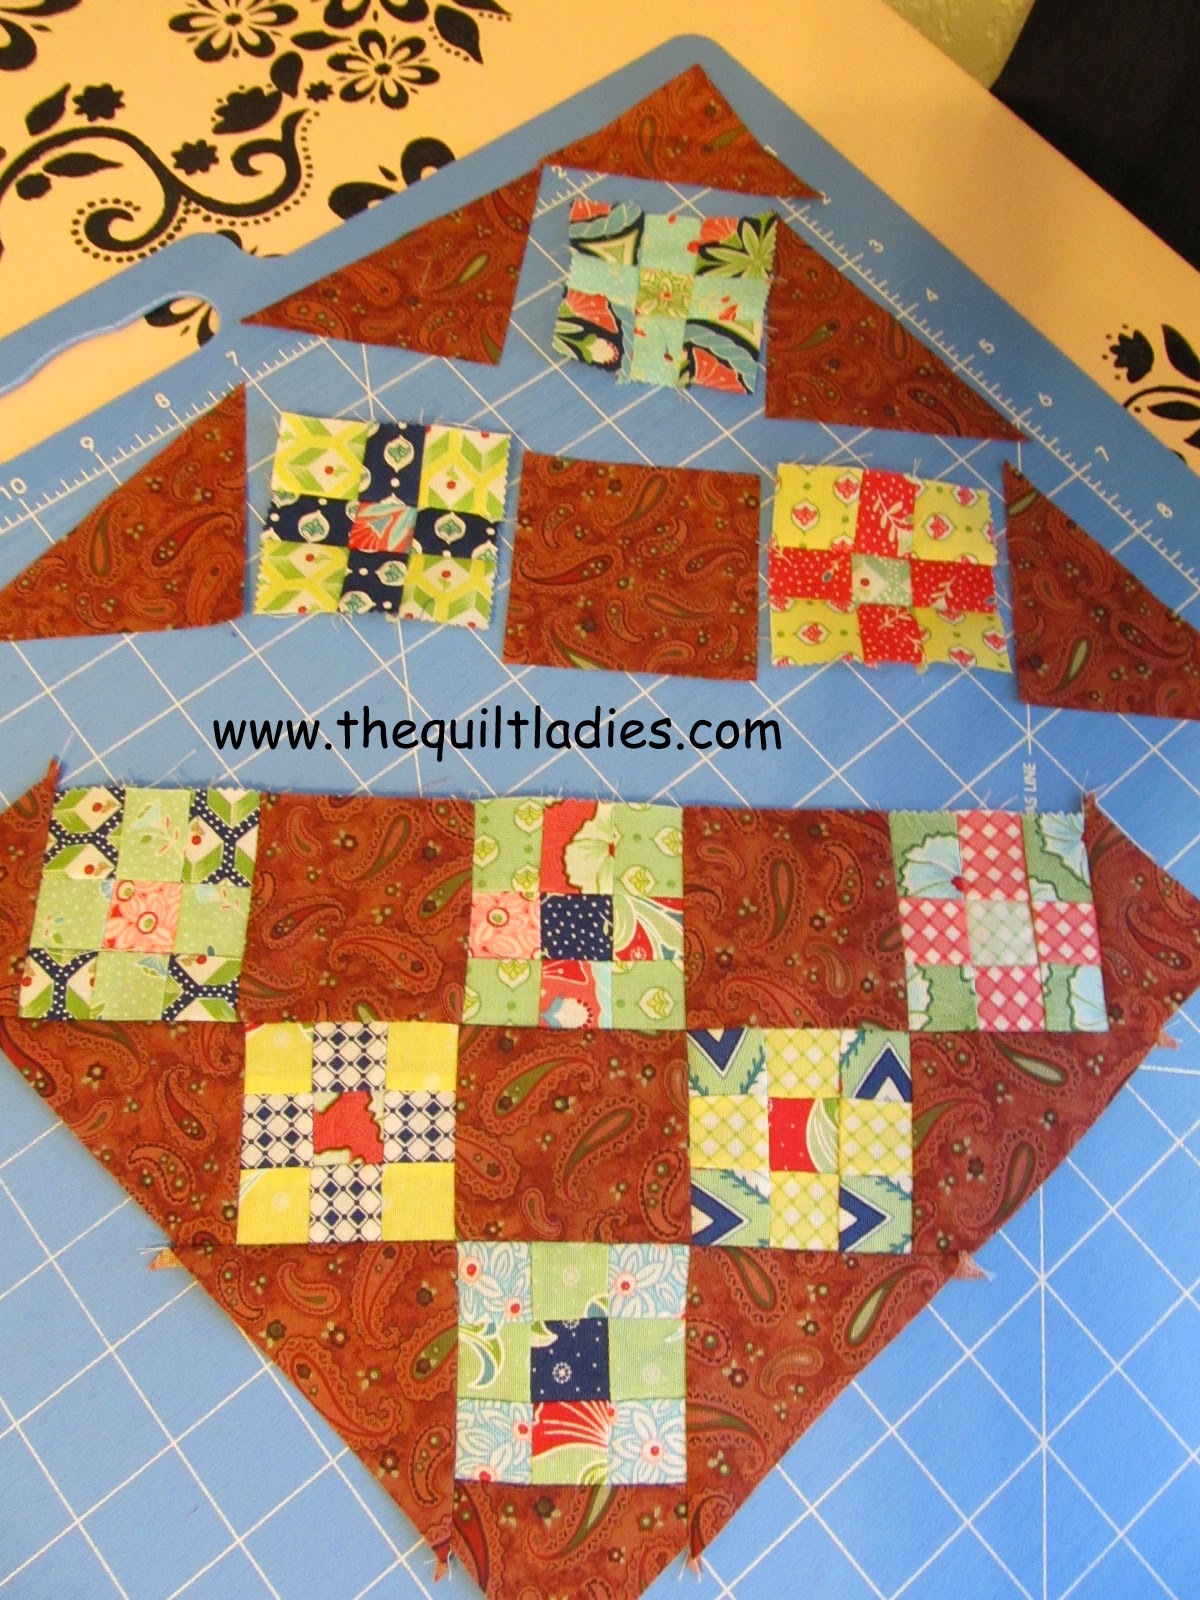 Nine Patch Quilted Table Topper Tutorial by The Quilt Ladies